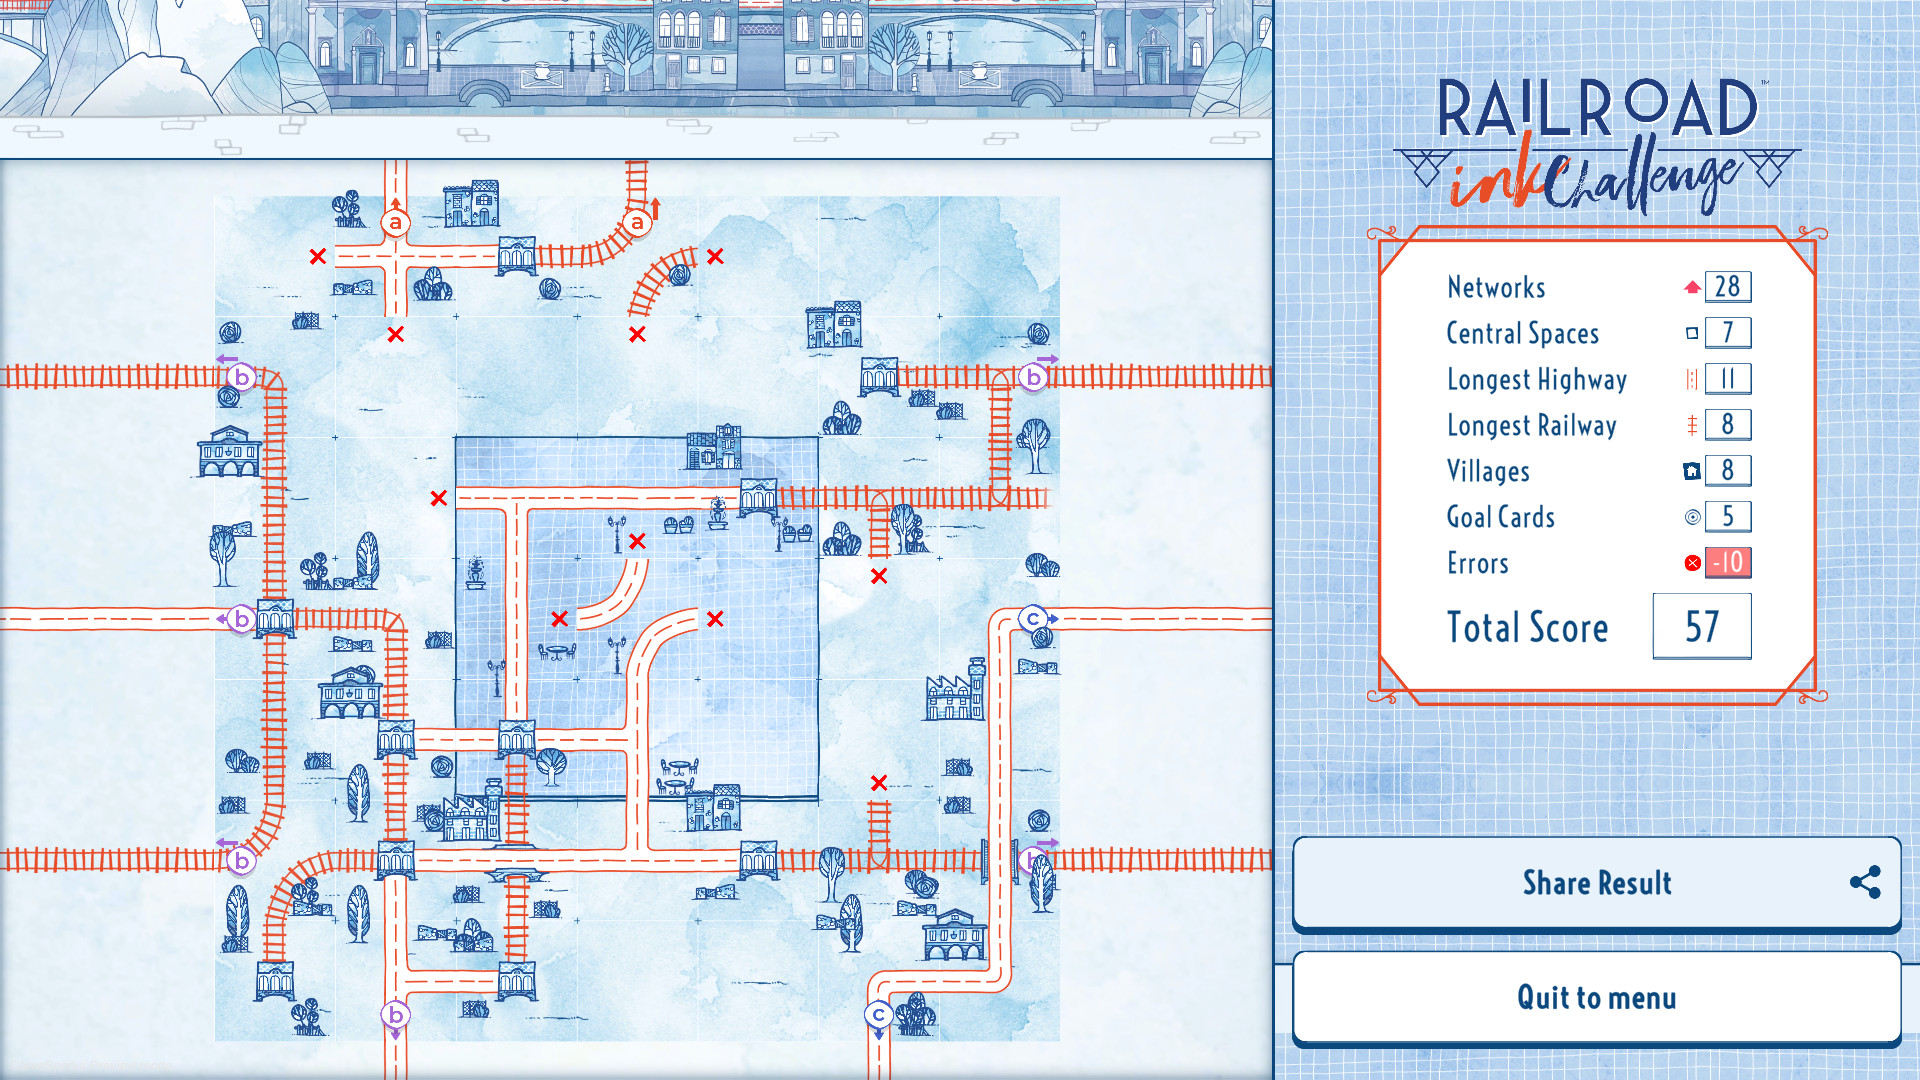 Railroad Ink Challenge (PC) Review